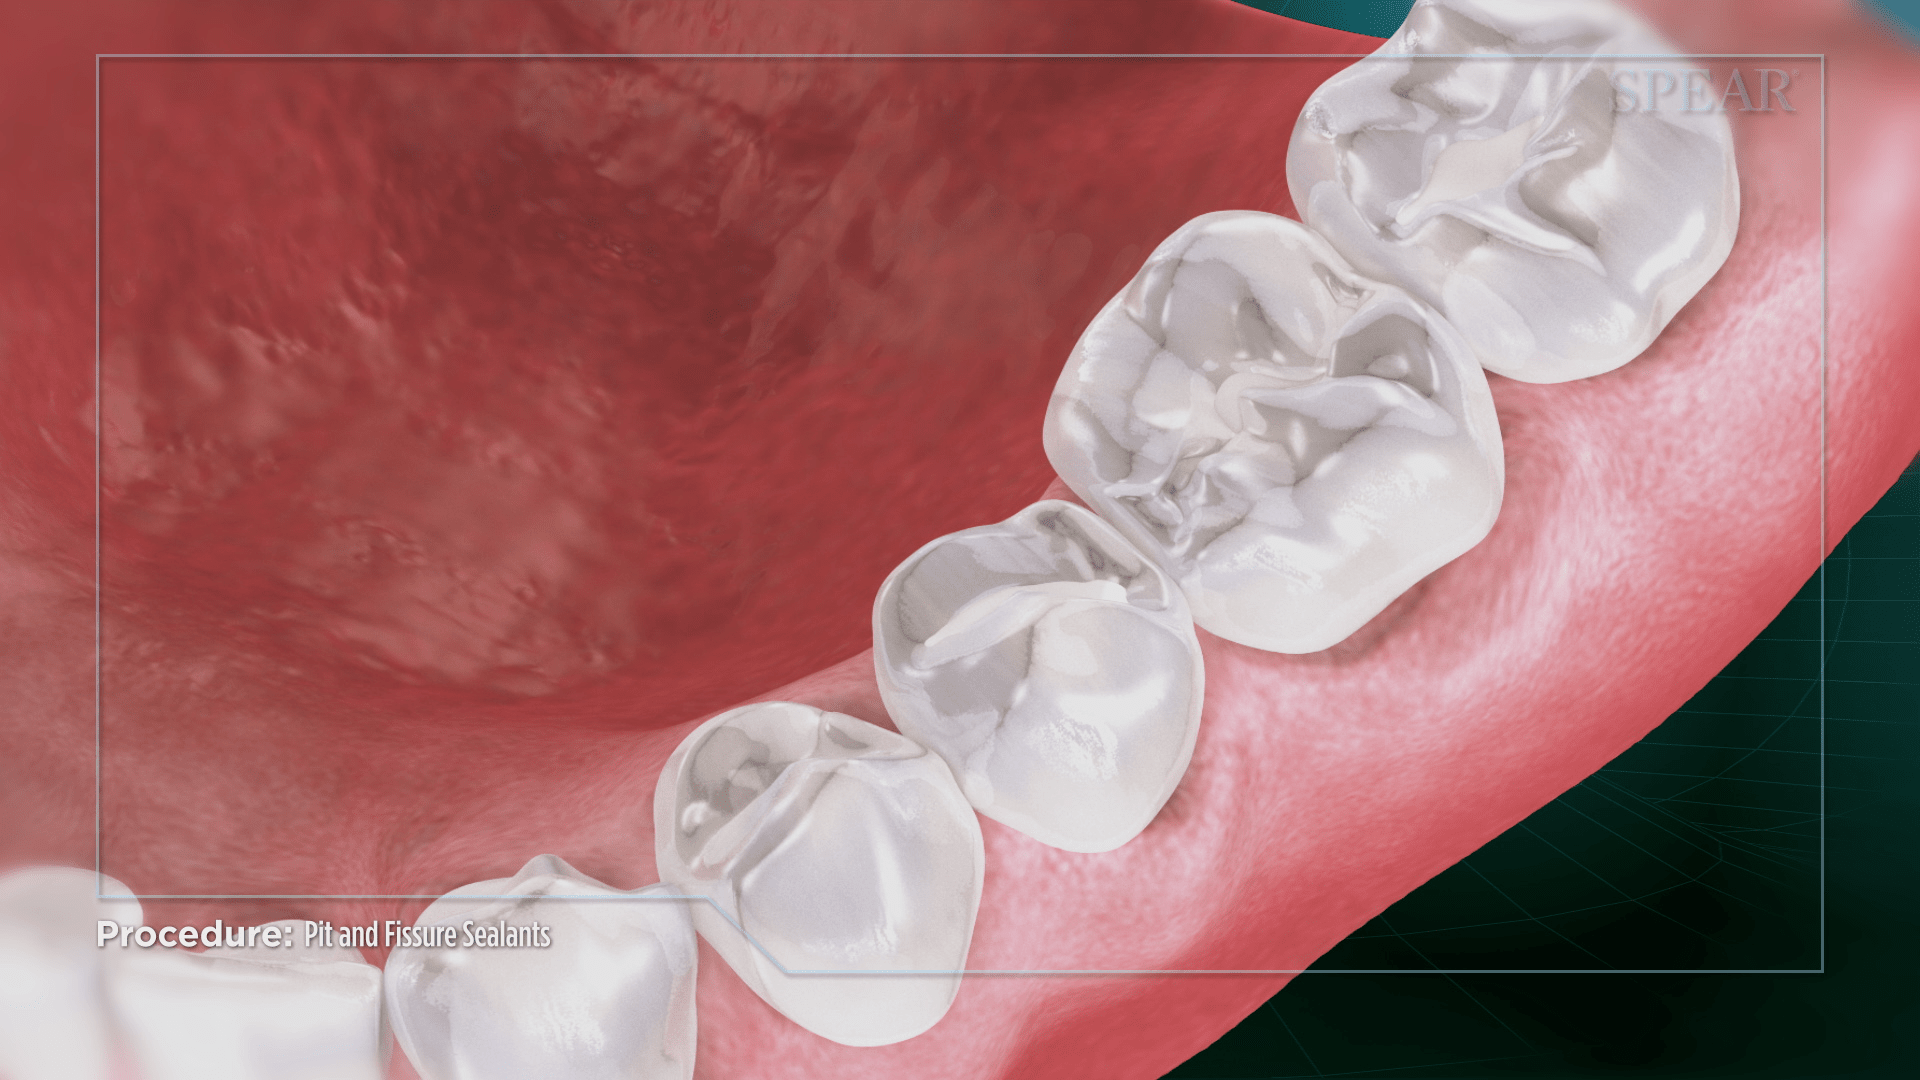 pit and fissure sealants 7